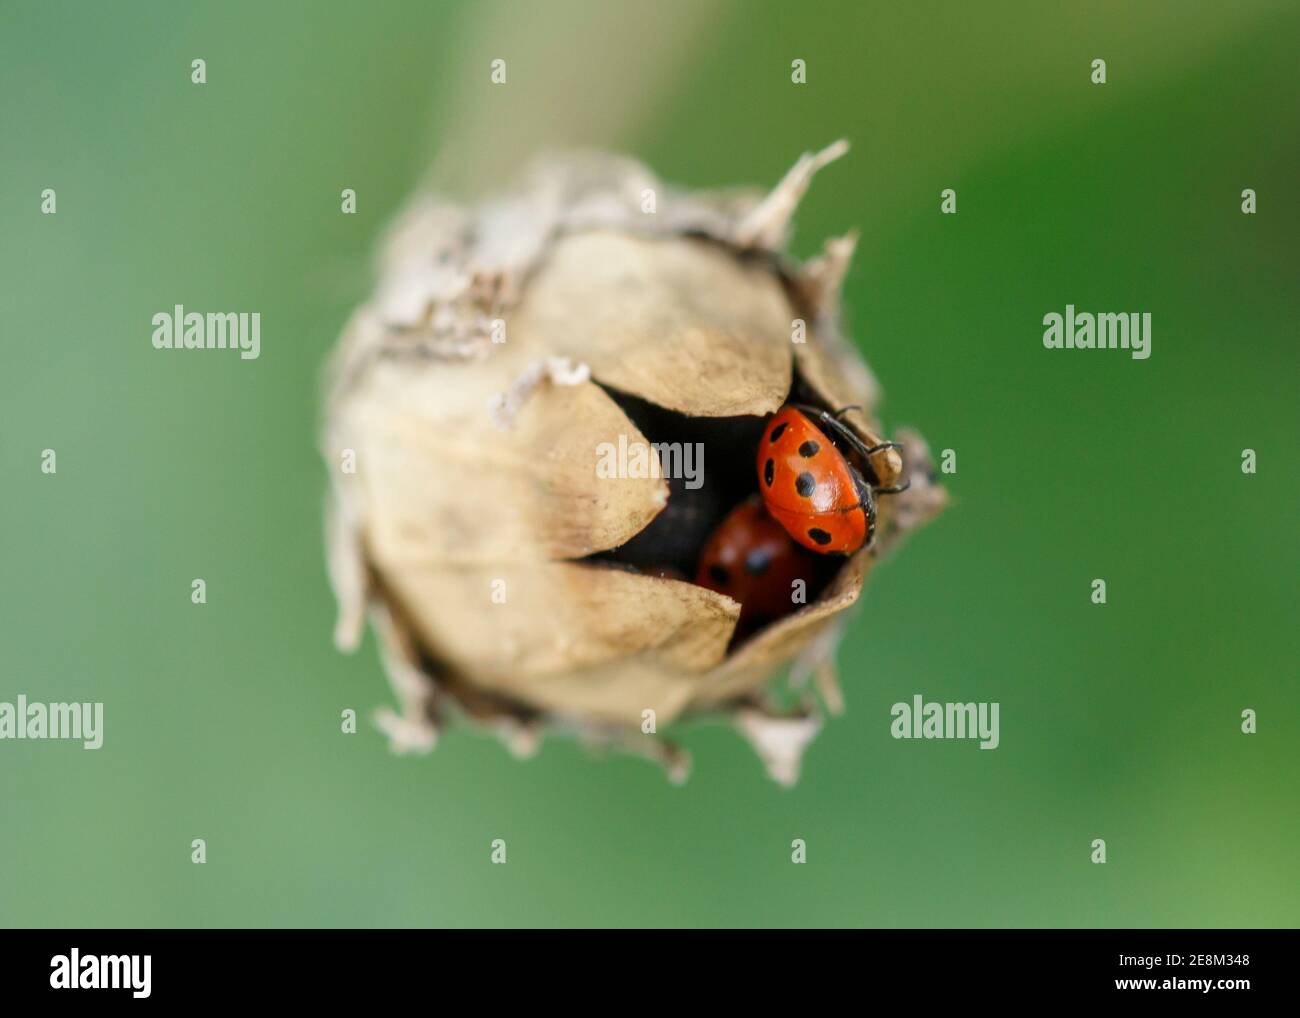 11 spot ladybirds hibernating or sheltering in seed head Stock Photo